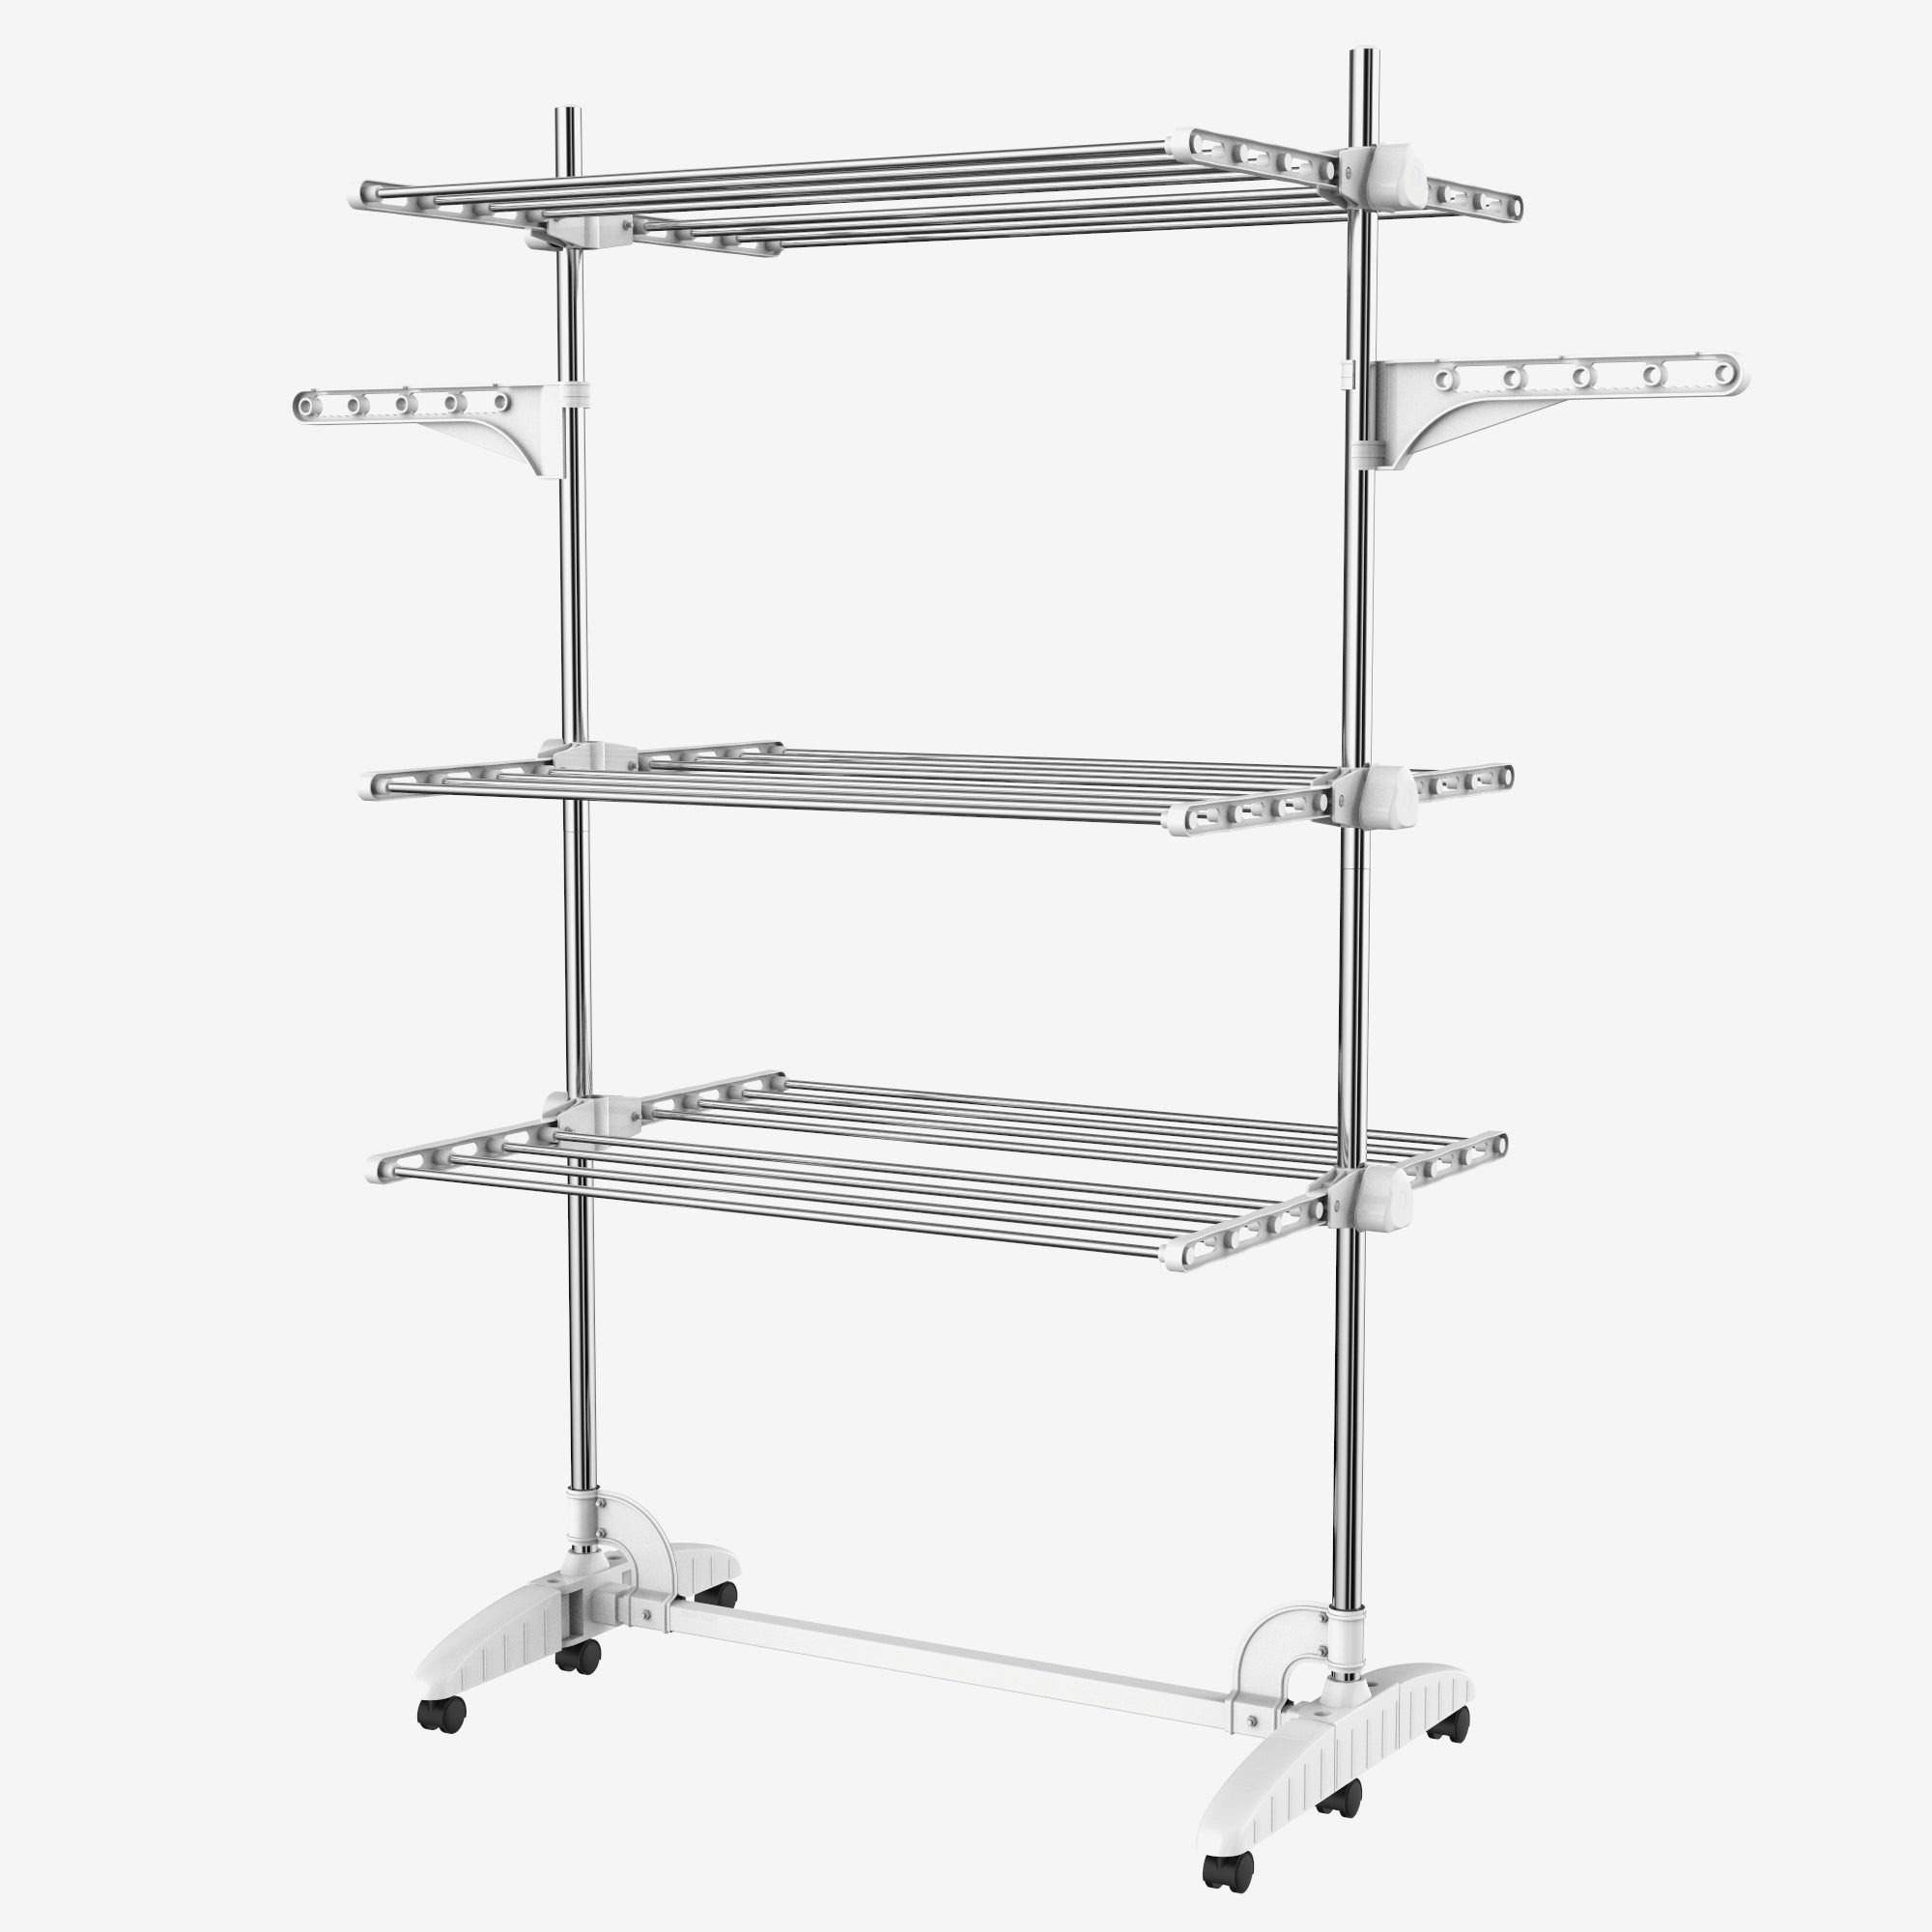 Clothes-Drying-Rack-3-shelves-White-Clothes-Drying-Rack-3-shelves-White-with-wings-Material-Stainless-steel-tubes